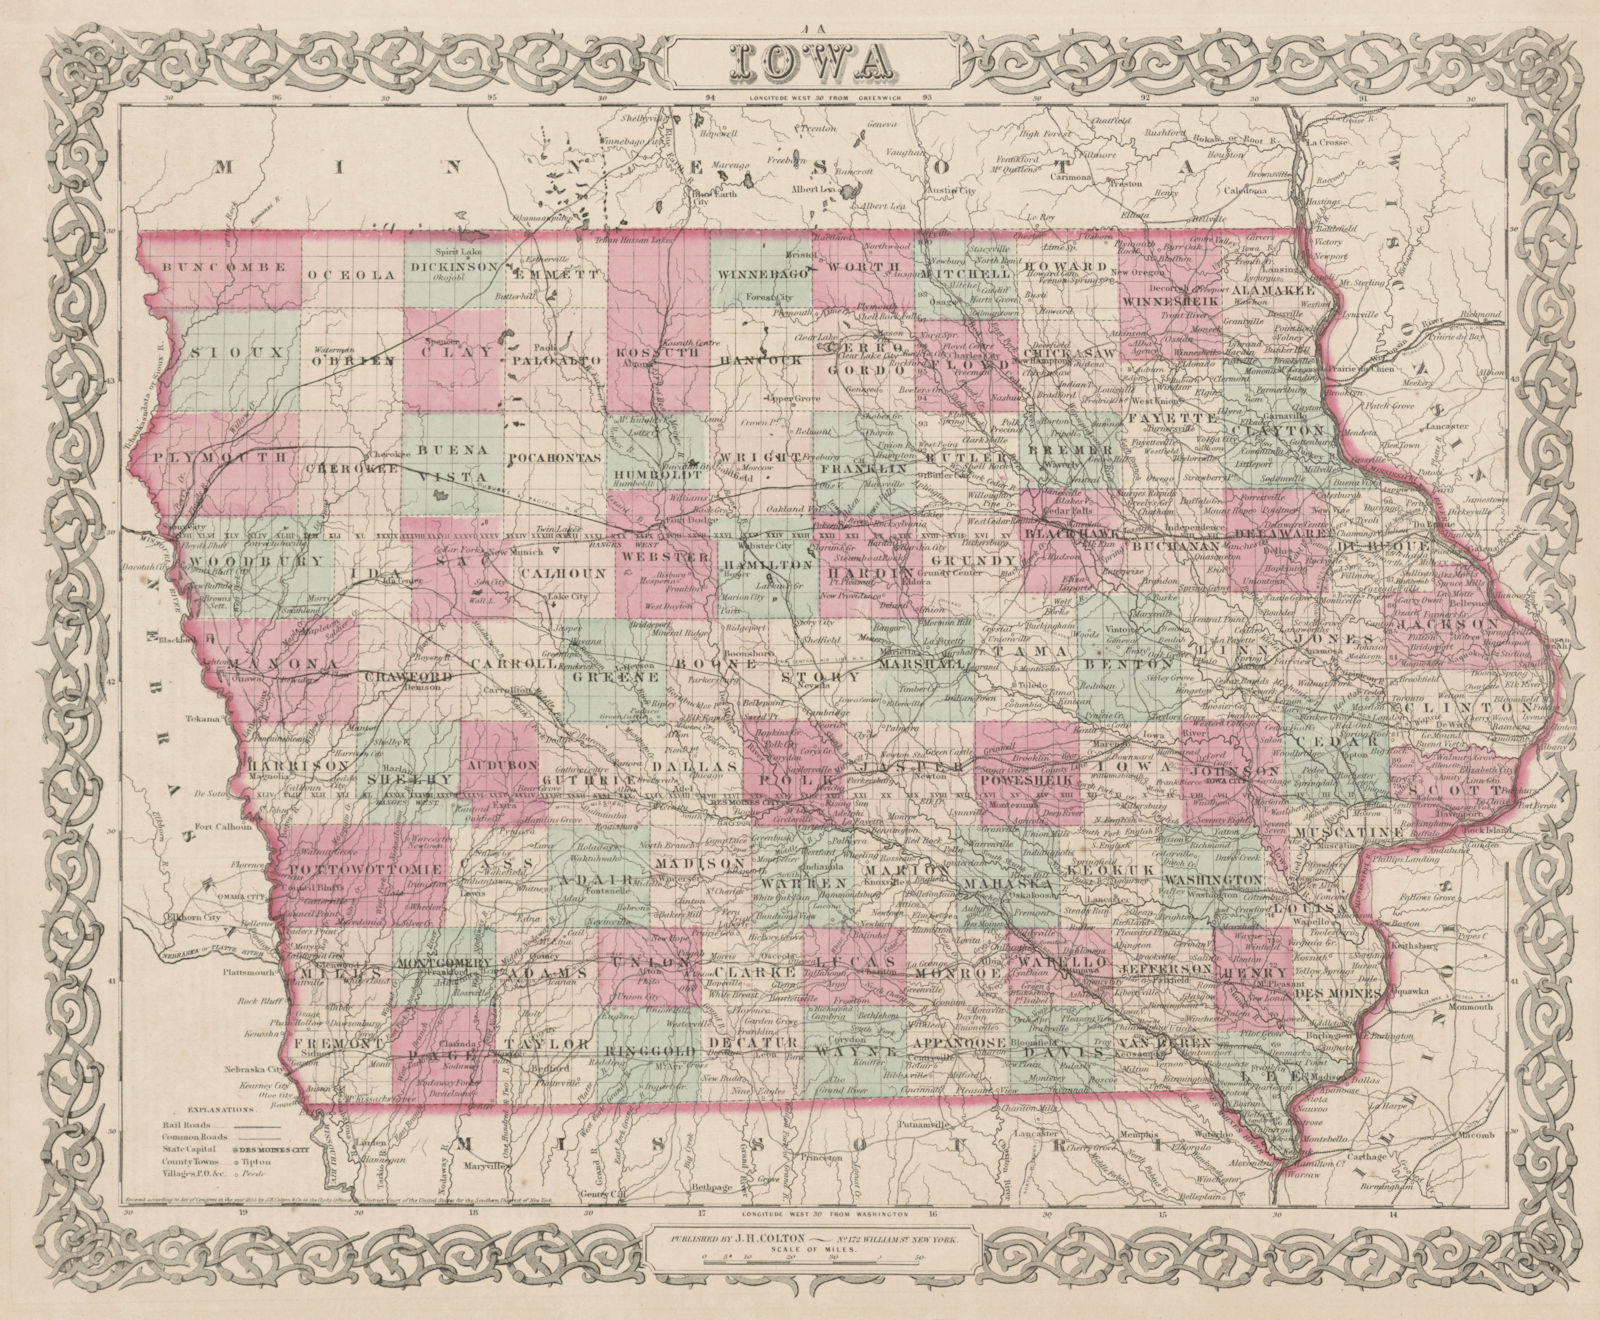 Iowa decorative antique US state map. COLTON 1863 old plan chart